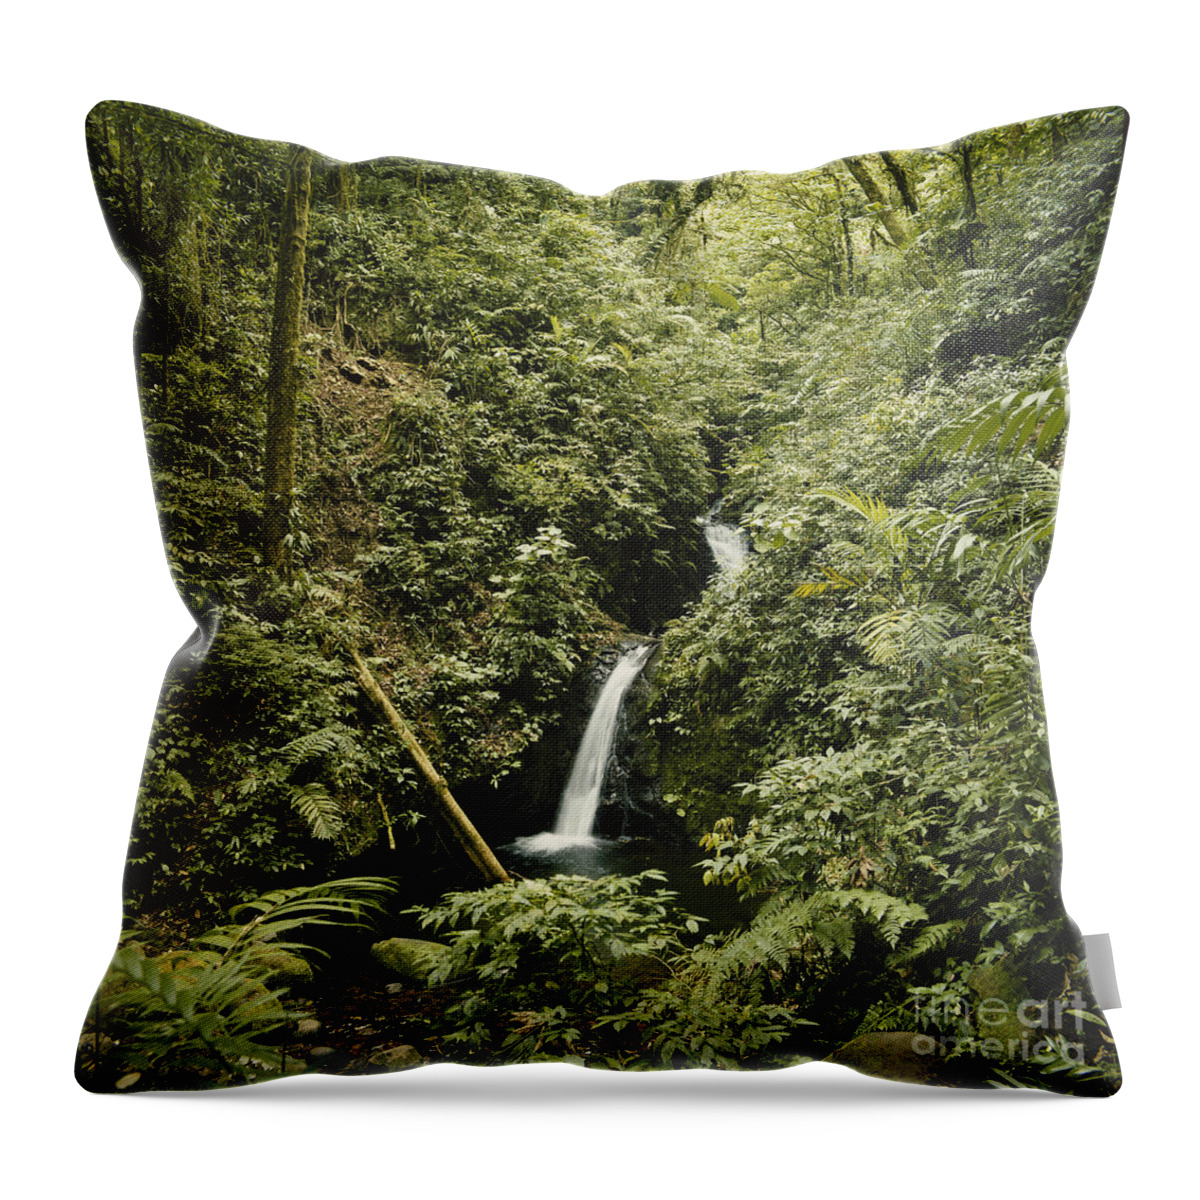 Waterfall Throw Pillow featuring the photograph Cloud Forest Waterfall by Gregory G. Dimijian, M.D.